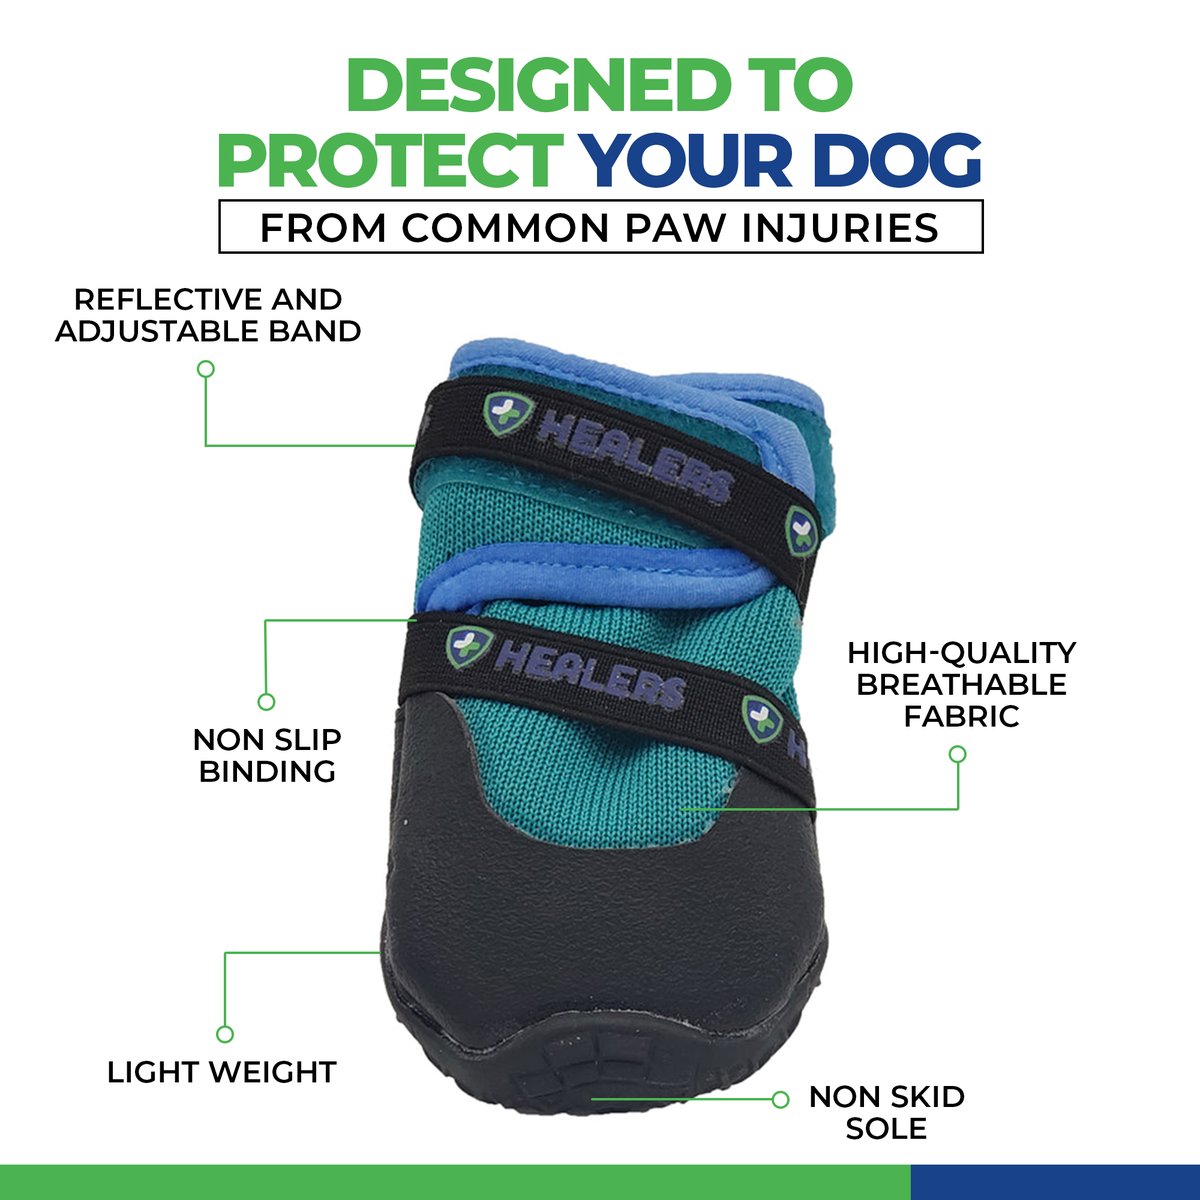 Spring is just around the corner! Find our protective Urban Walkers Dog Boots in Target stores, or if they don't have your size, at hubs.ly/Q01HqWtG0 
Protect your pups' feet! 🐾🐶
#healerspetcare #target #targetstyle #targetdoesitagain #findintarget #shoptarget